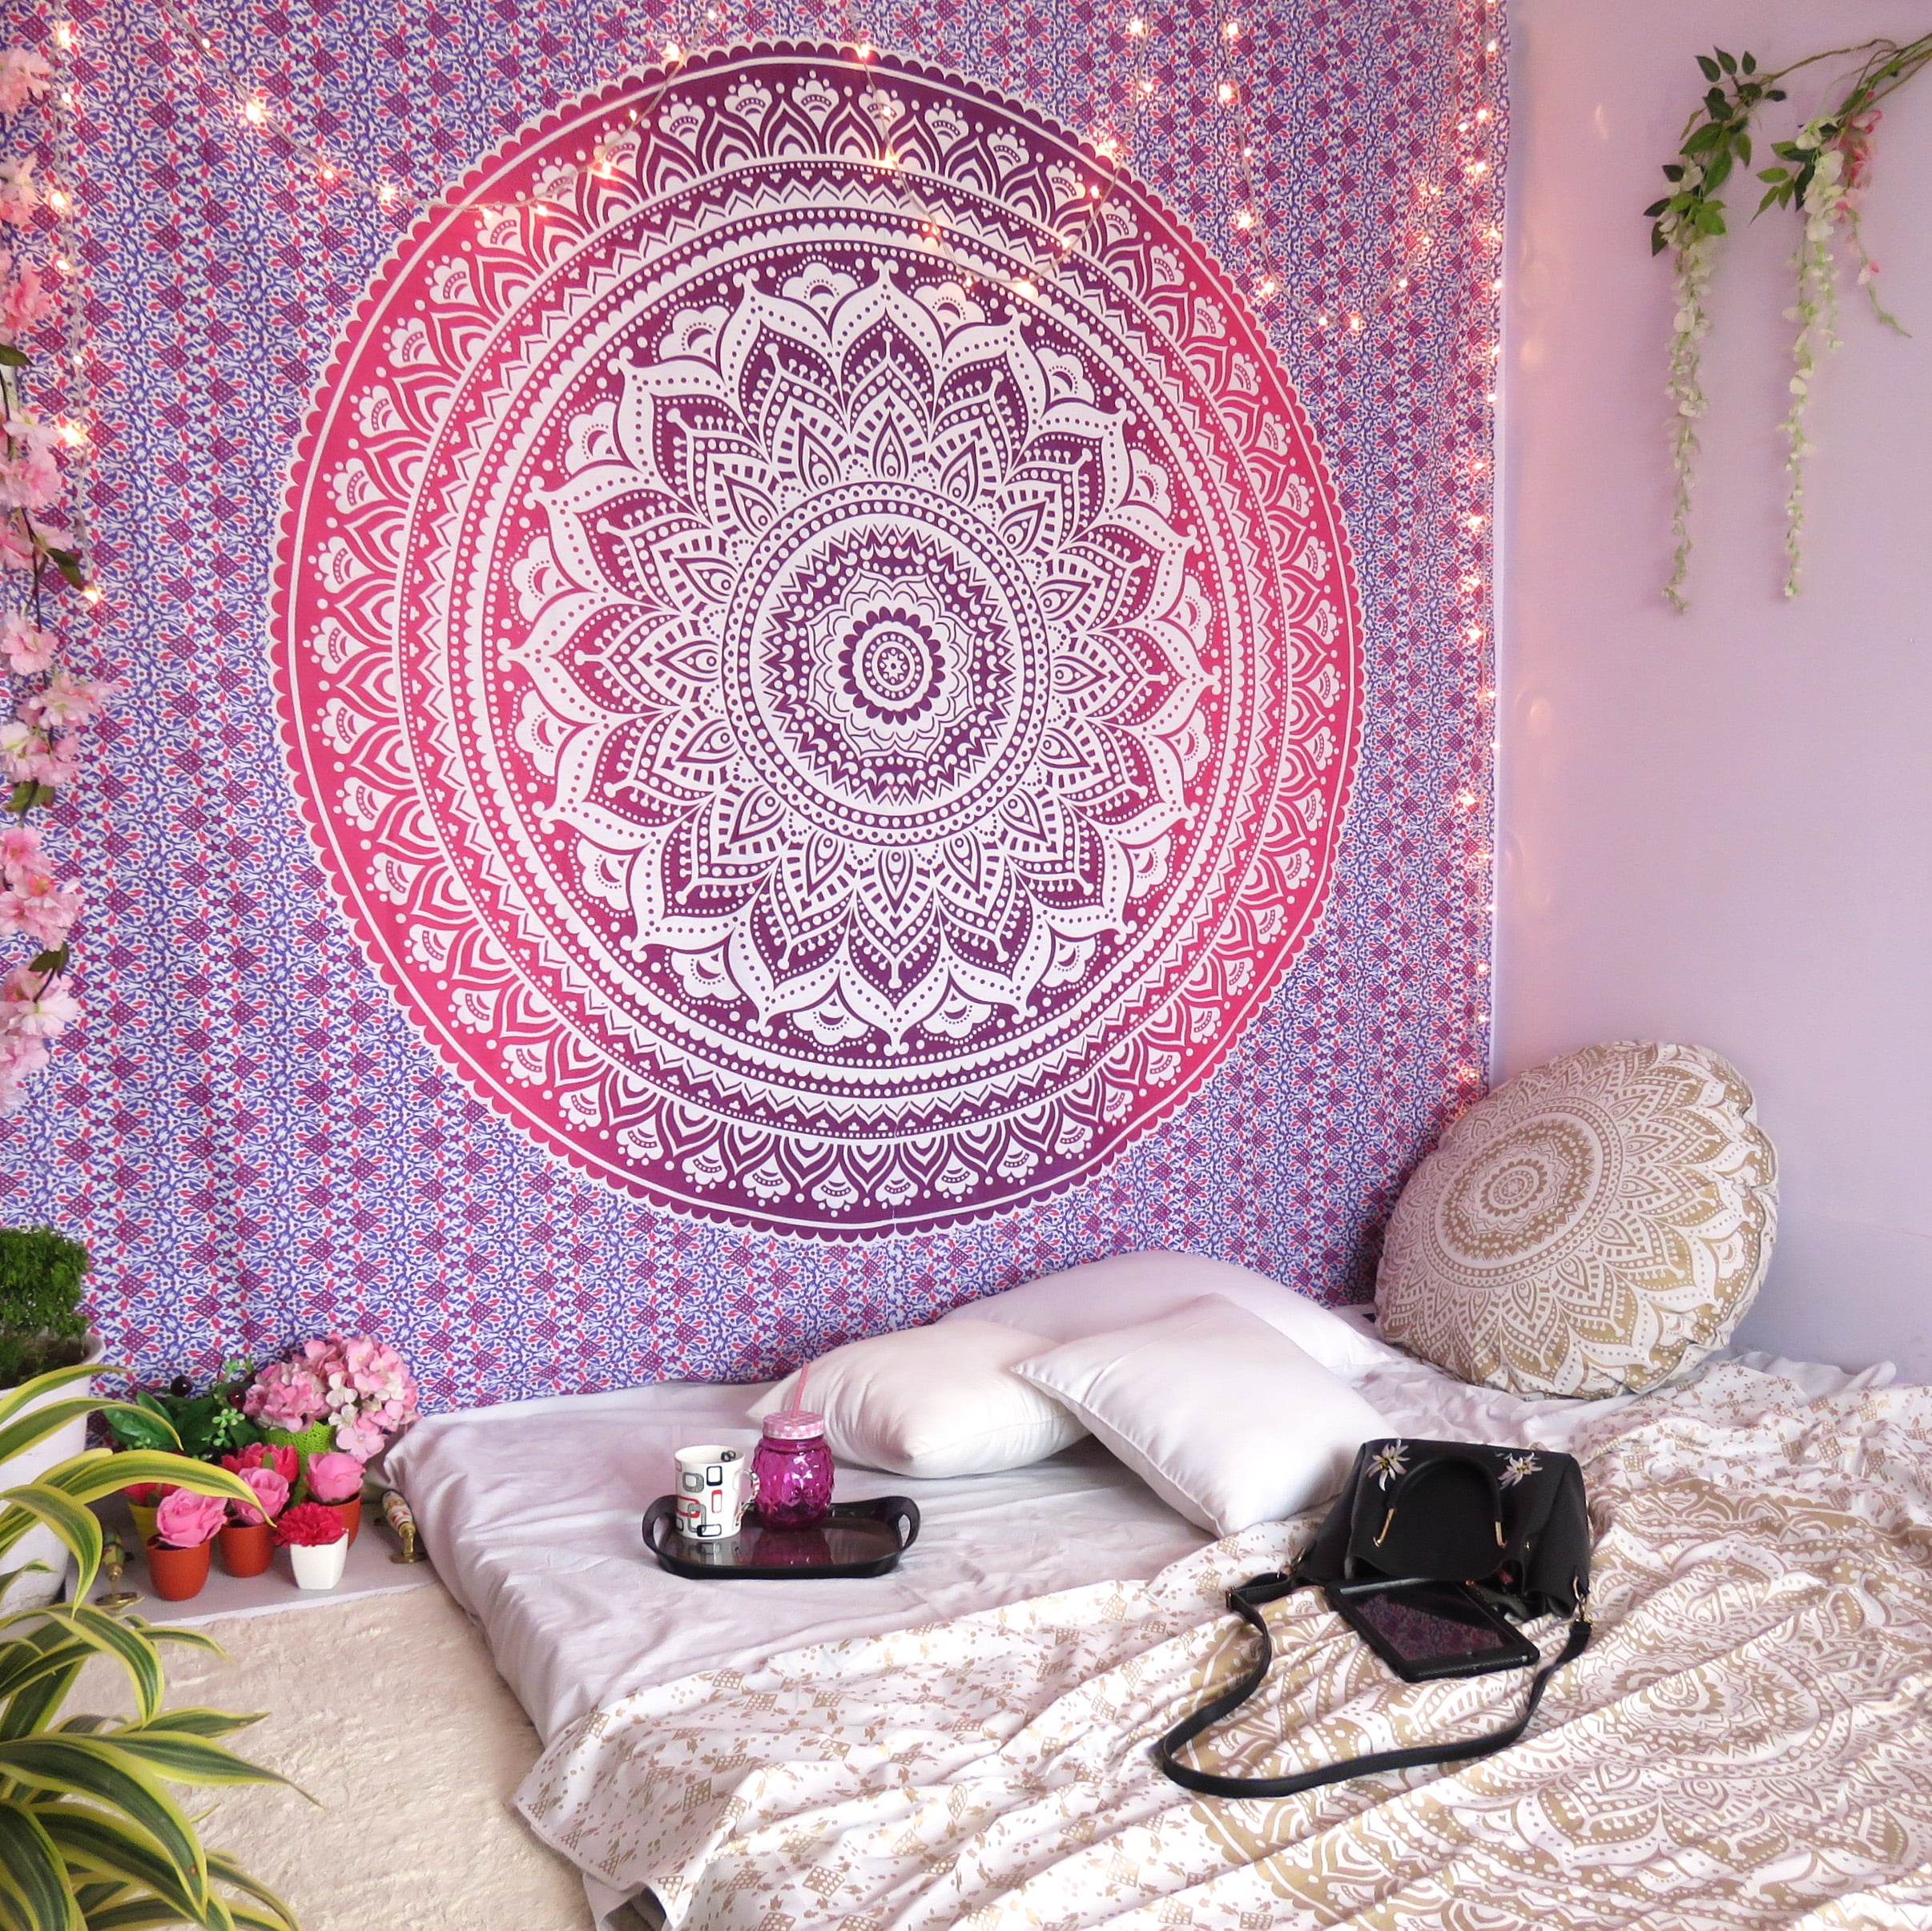 Tree of Life Psychedelic Wall Hanging Elephant Hippie Bohemian Bedspread Dorm Home Decor